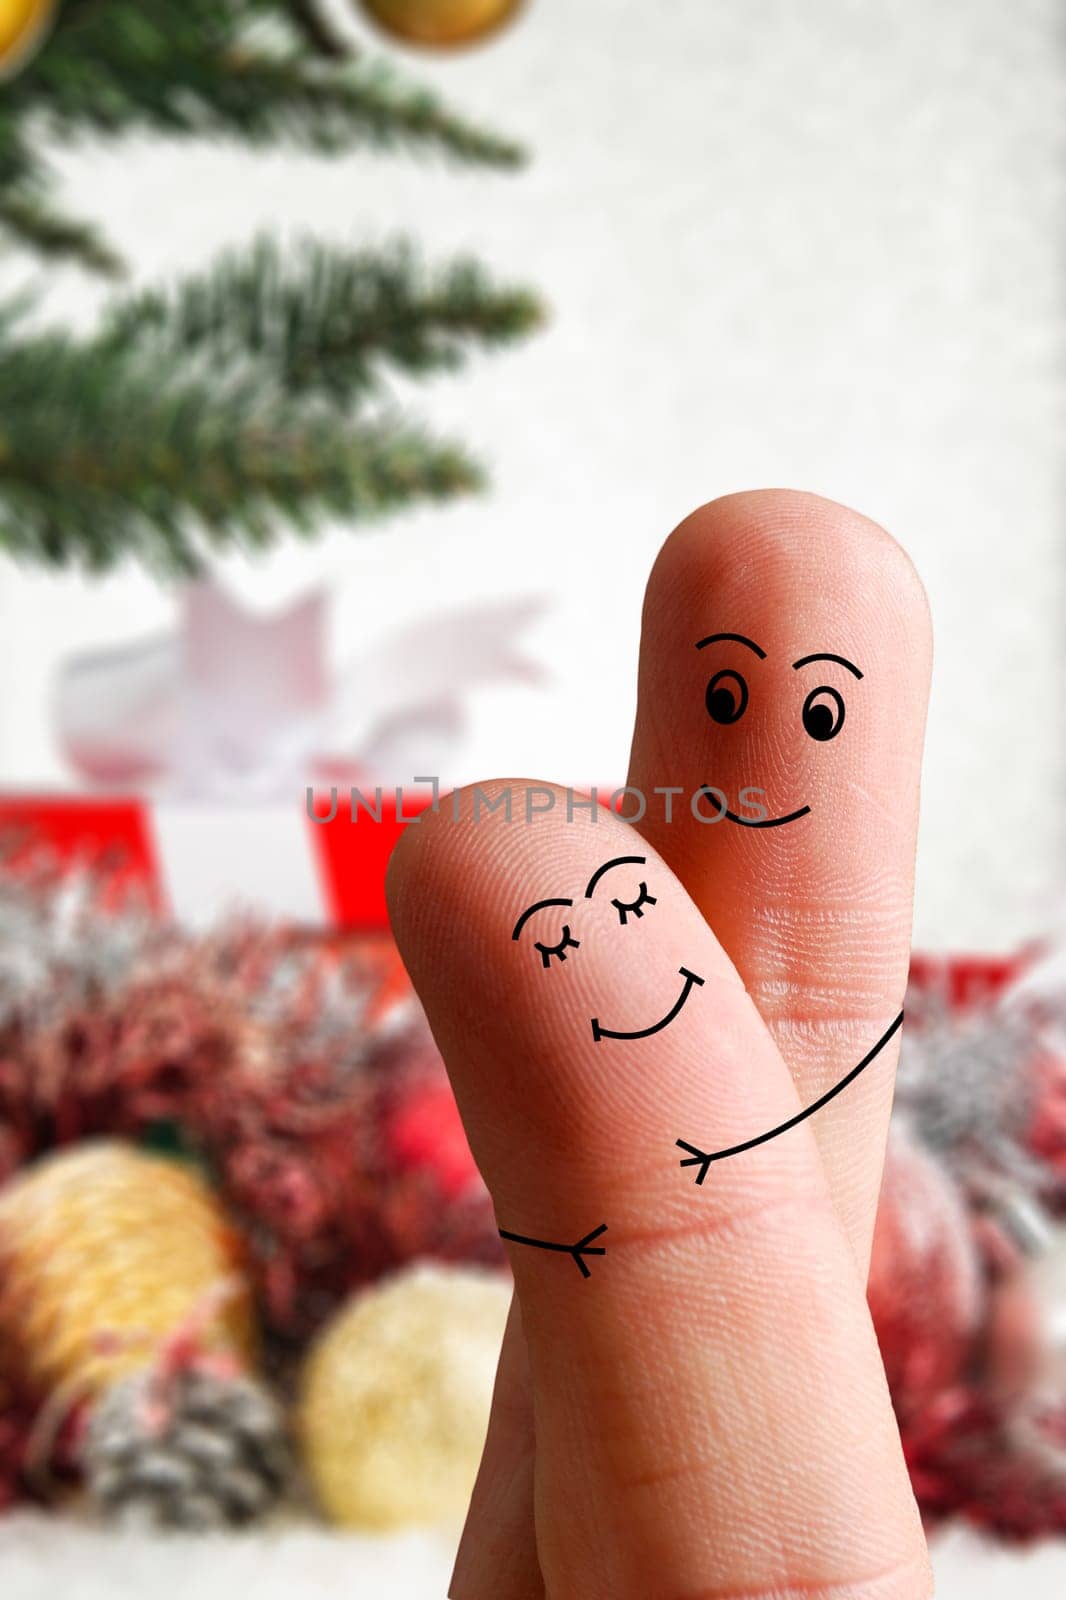 Faces of fingers hugging each other isolated on Christmas decorated background. Happy family celebrating Christmas day concept